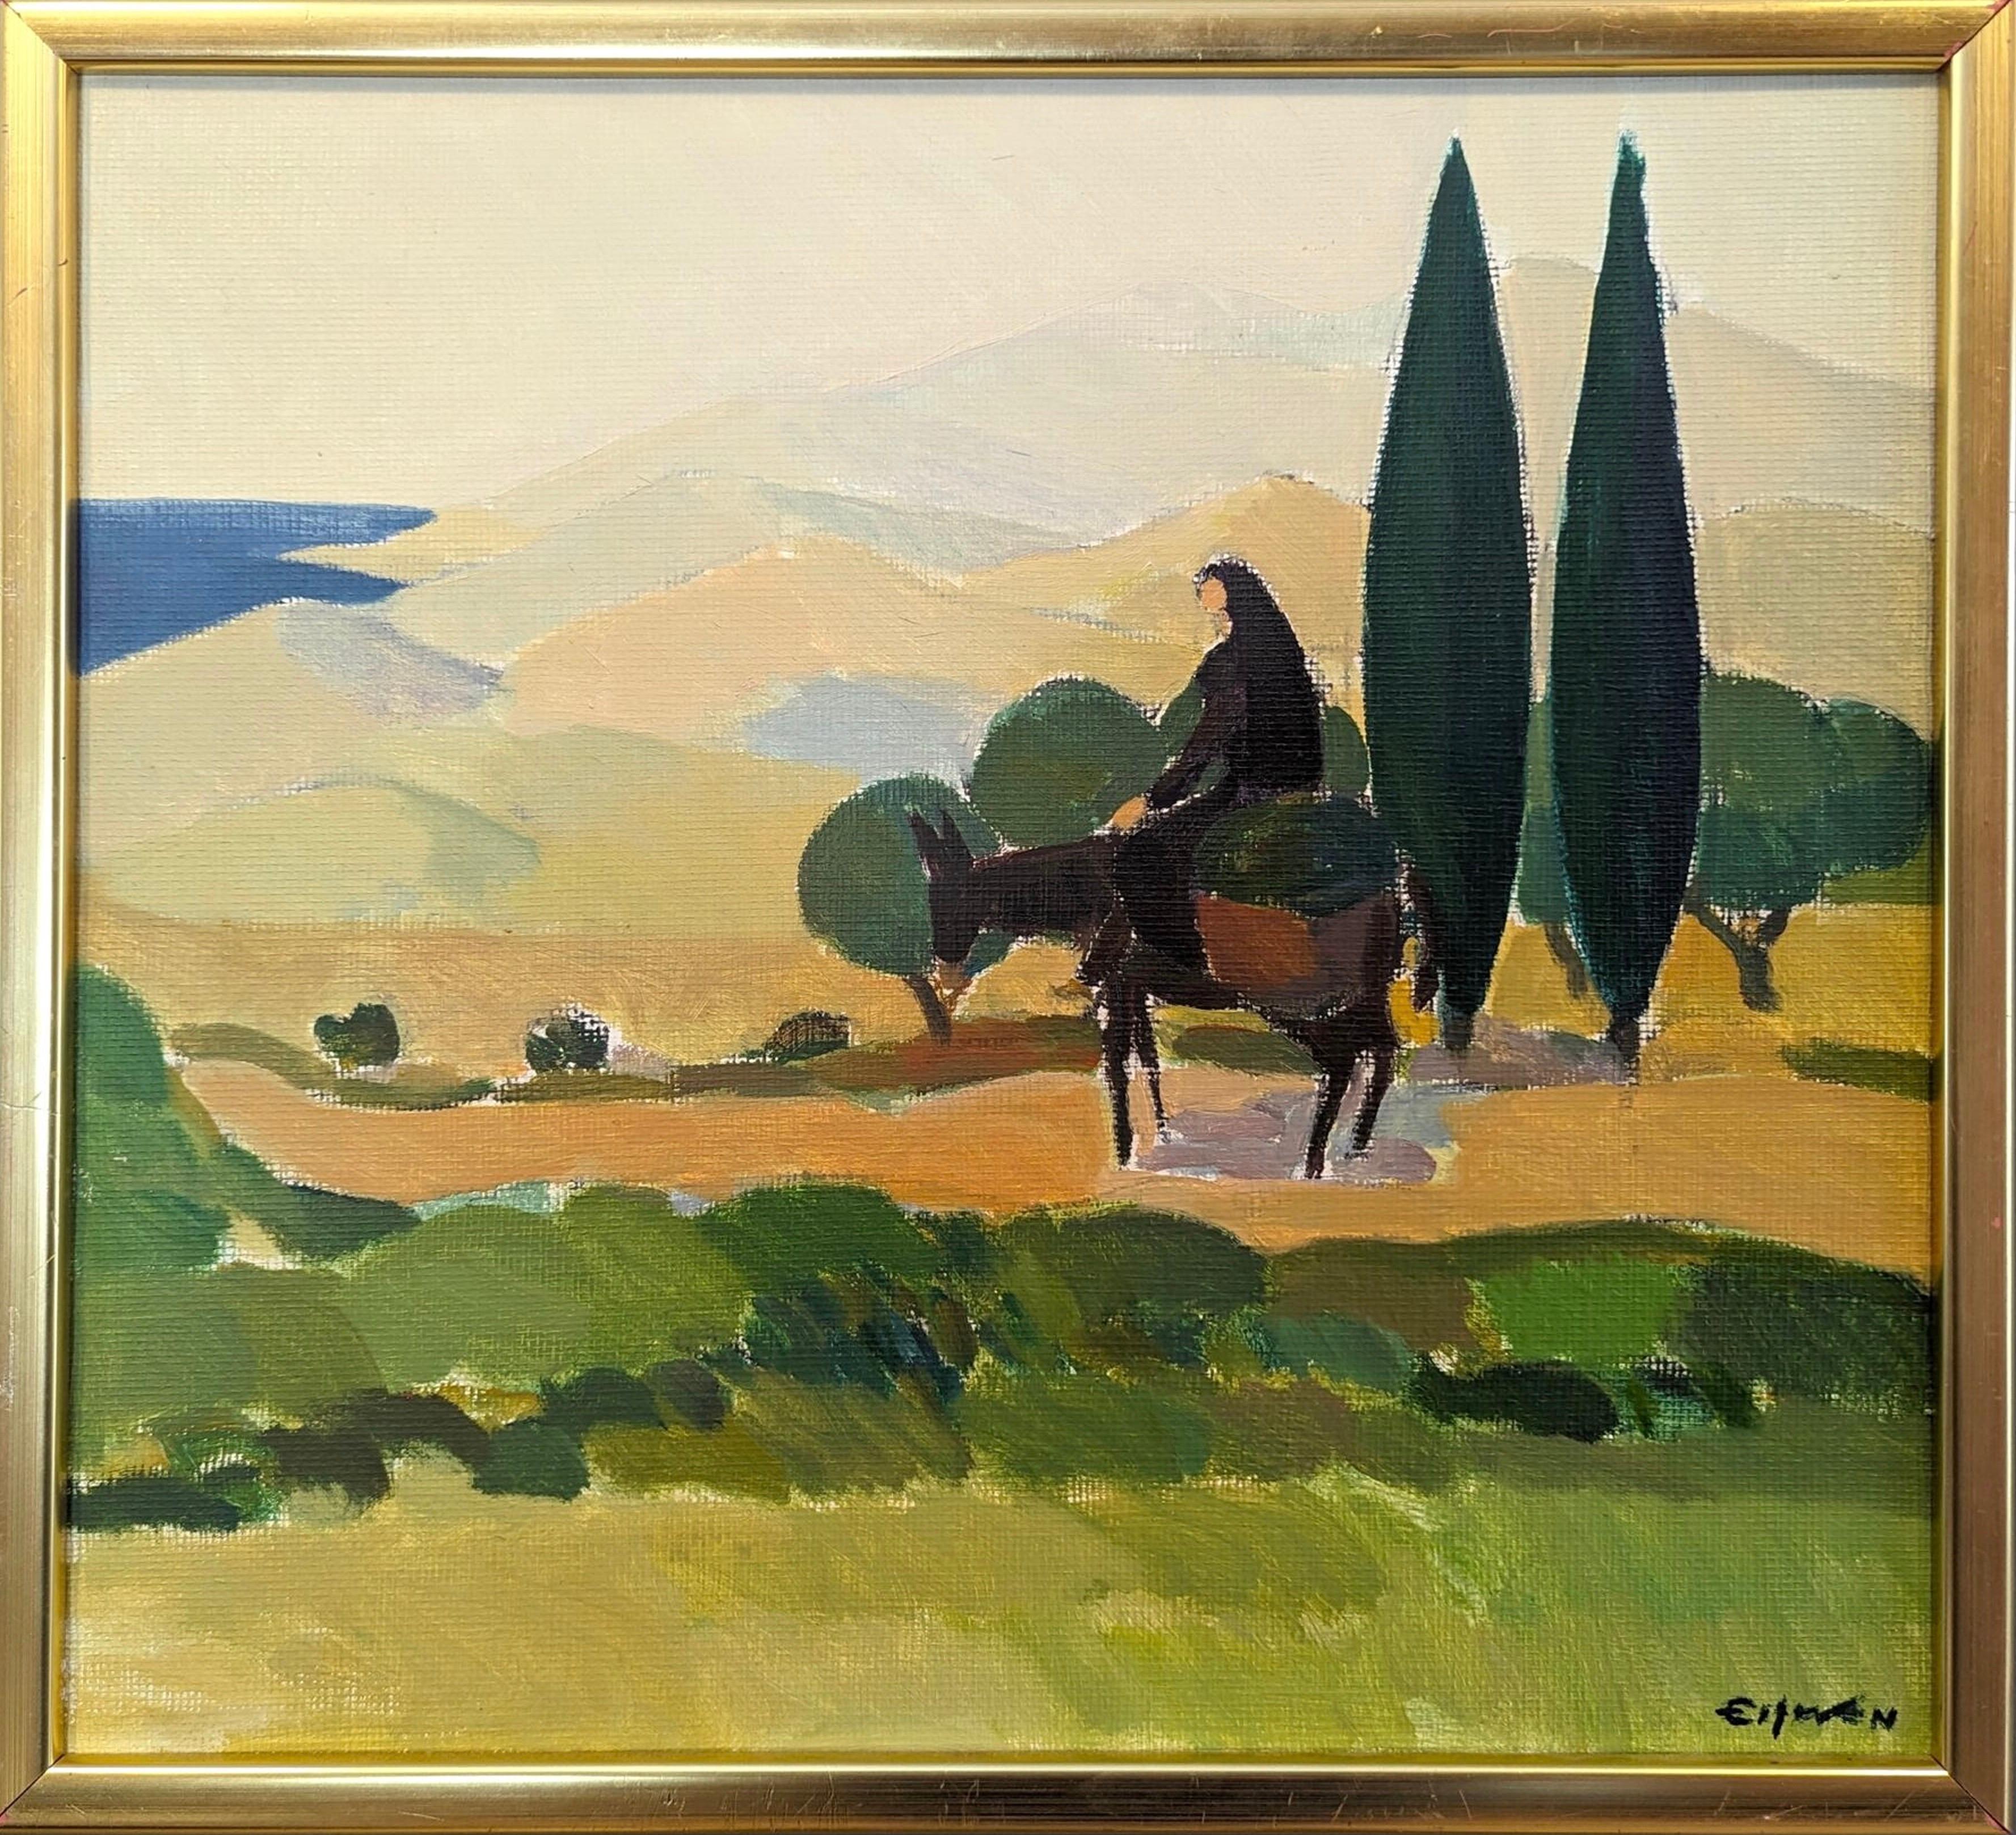 Unknown Landscape Painting - Vintage Mid-Century Modern Landscape Oil Painting - Cyprus Valley